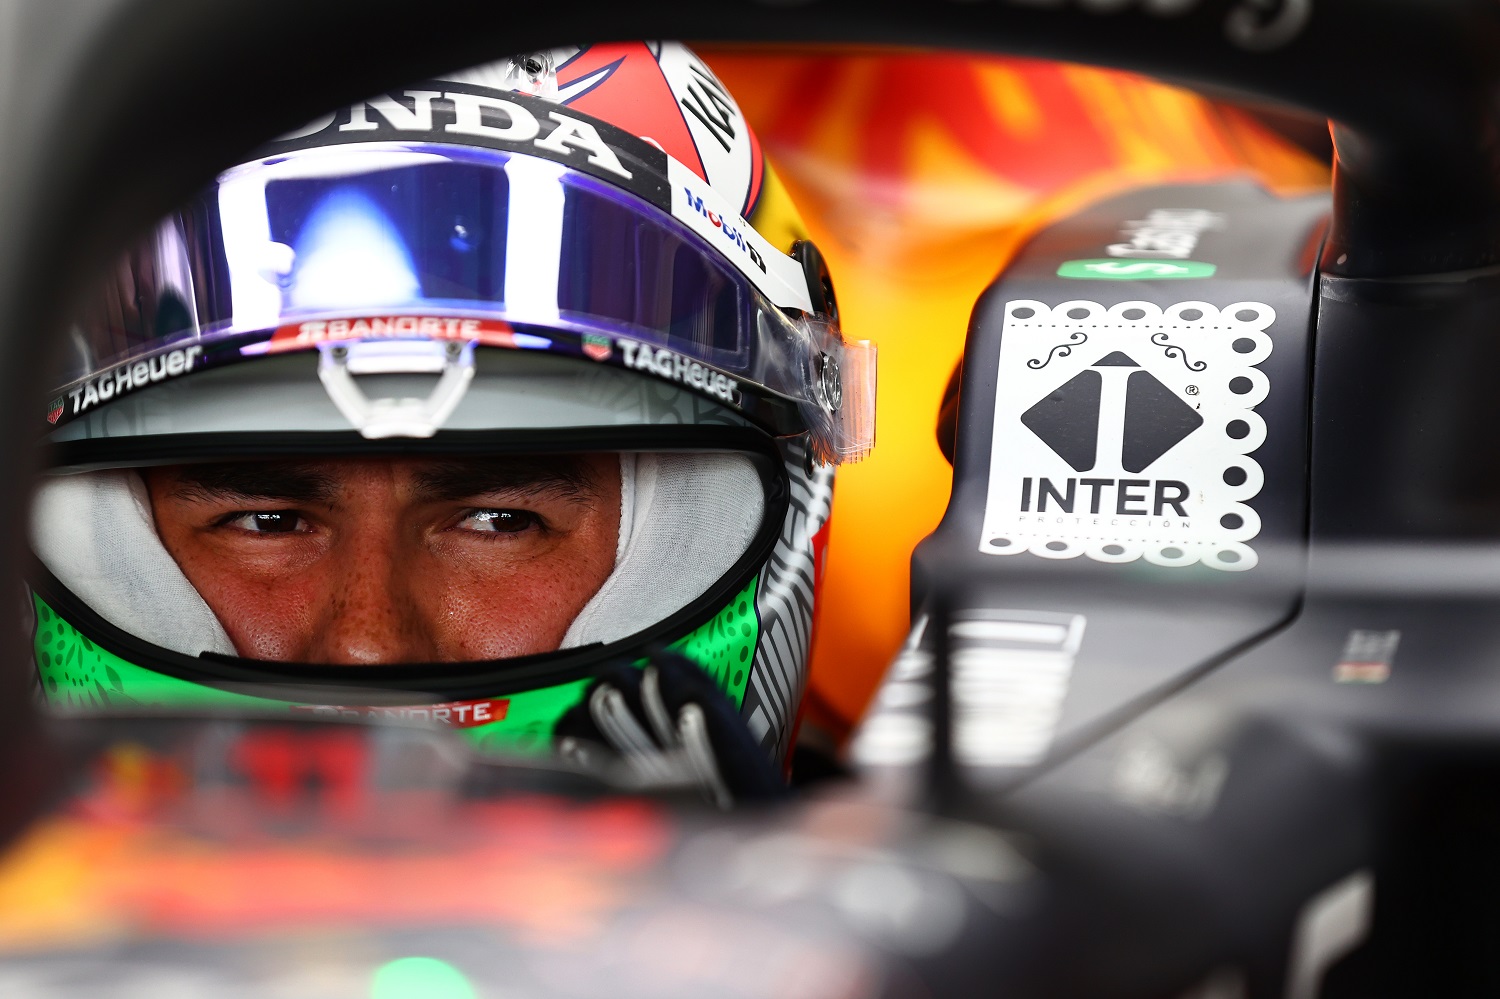 Mexican native Sergio Perez of Red Bull Racing prepares to drive in practice ahead of the Formula 1 Grand Prix of Mexico at Autodromo Hermanos Rodriguez on Nov. 5, 2021 in Mexico City. | Mark Thompson/Getty Images